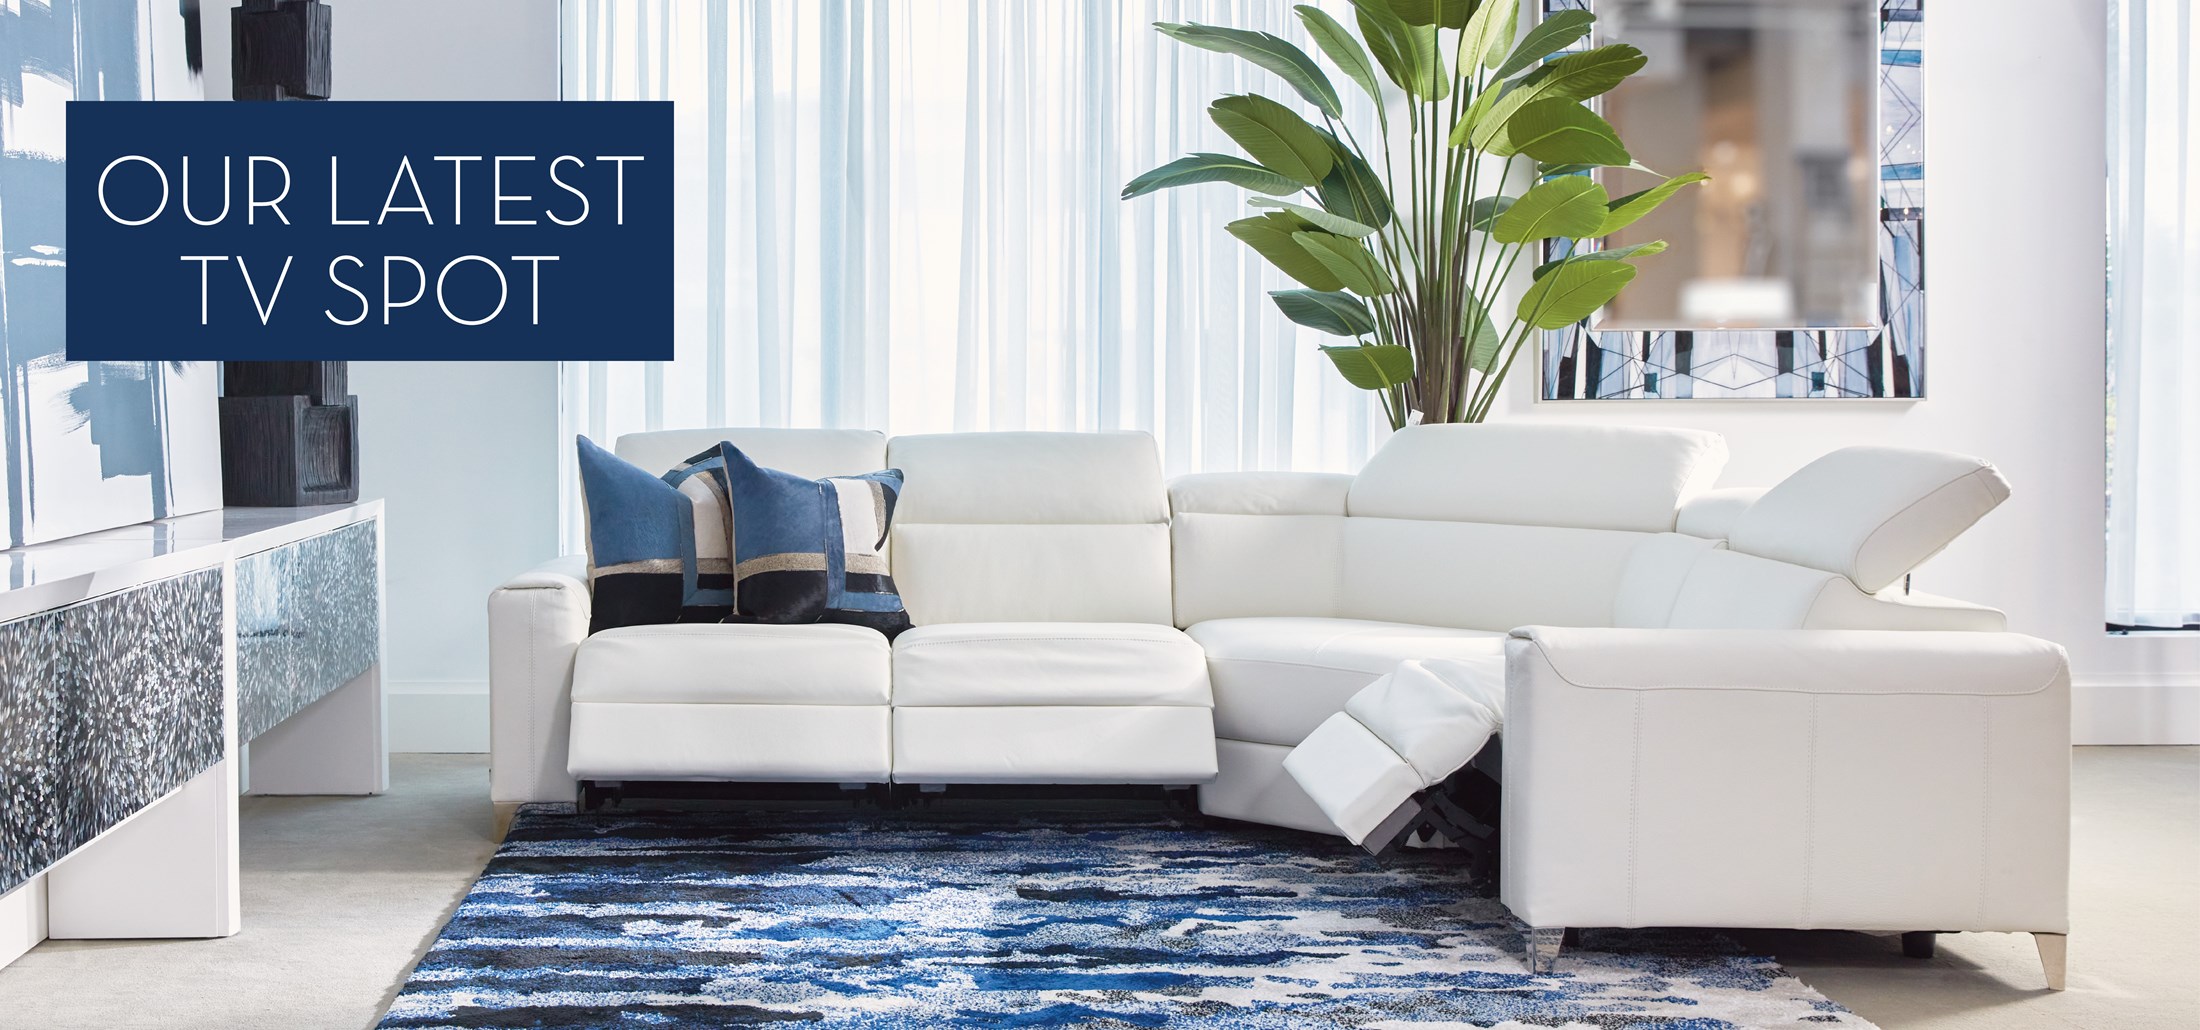 Image of the Eclettico Sectional with blue decor. Text: Our Latest TV Spot. Links to Latest TV Spot on Youtube.